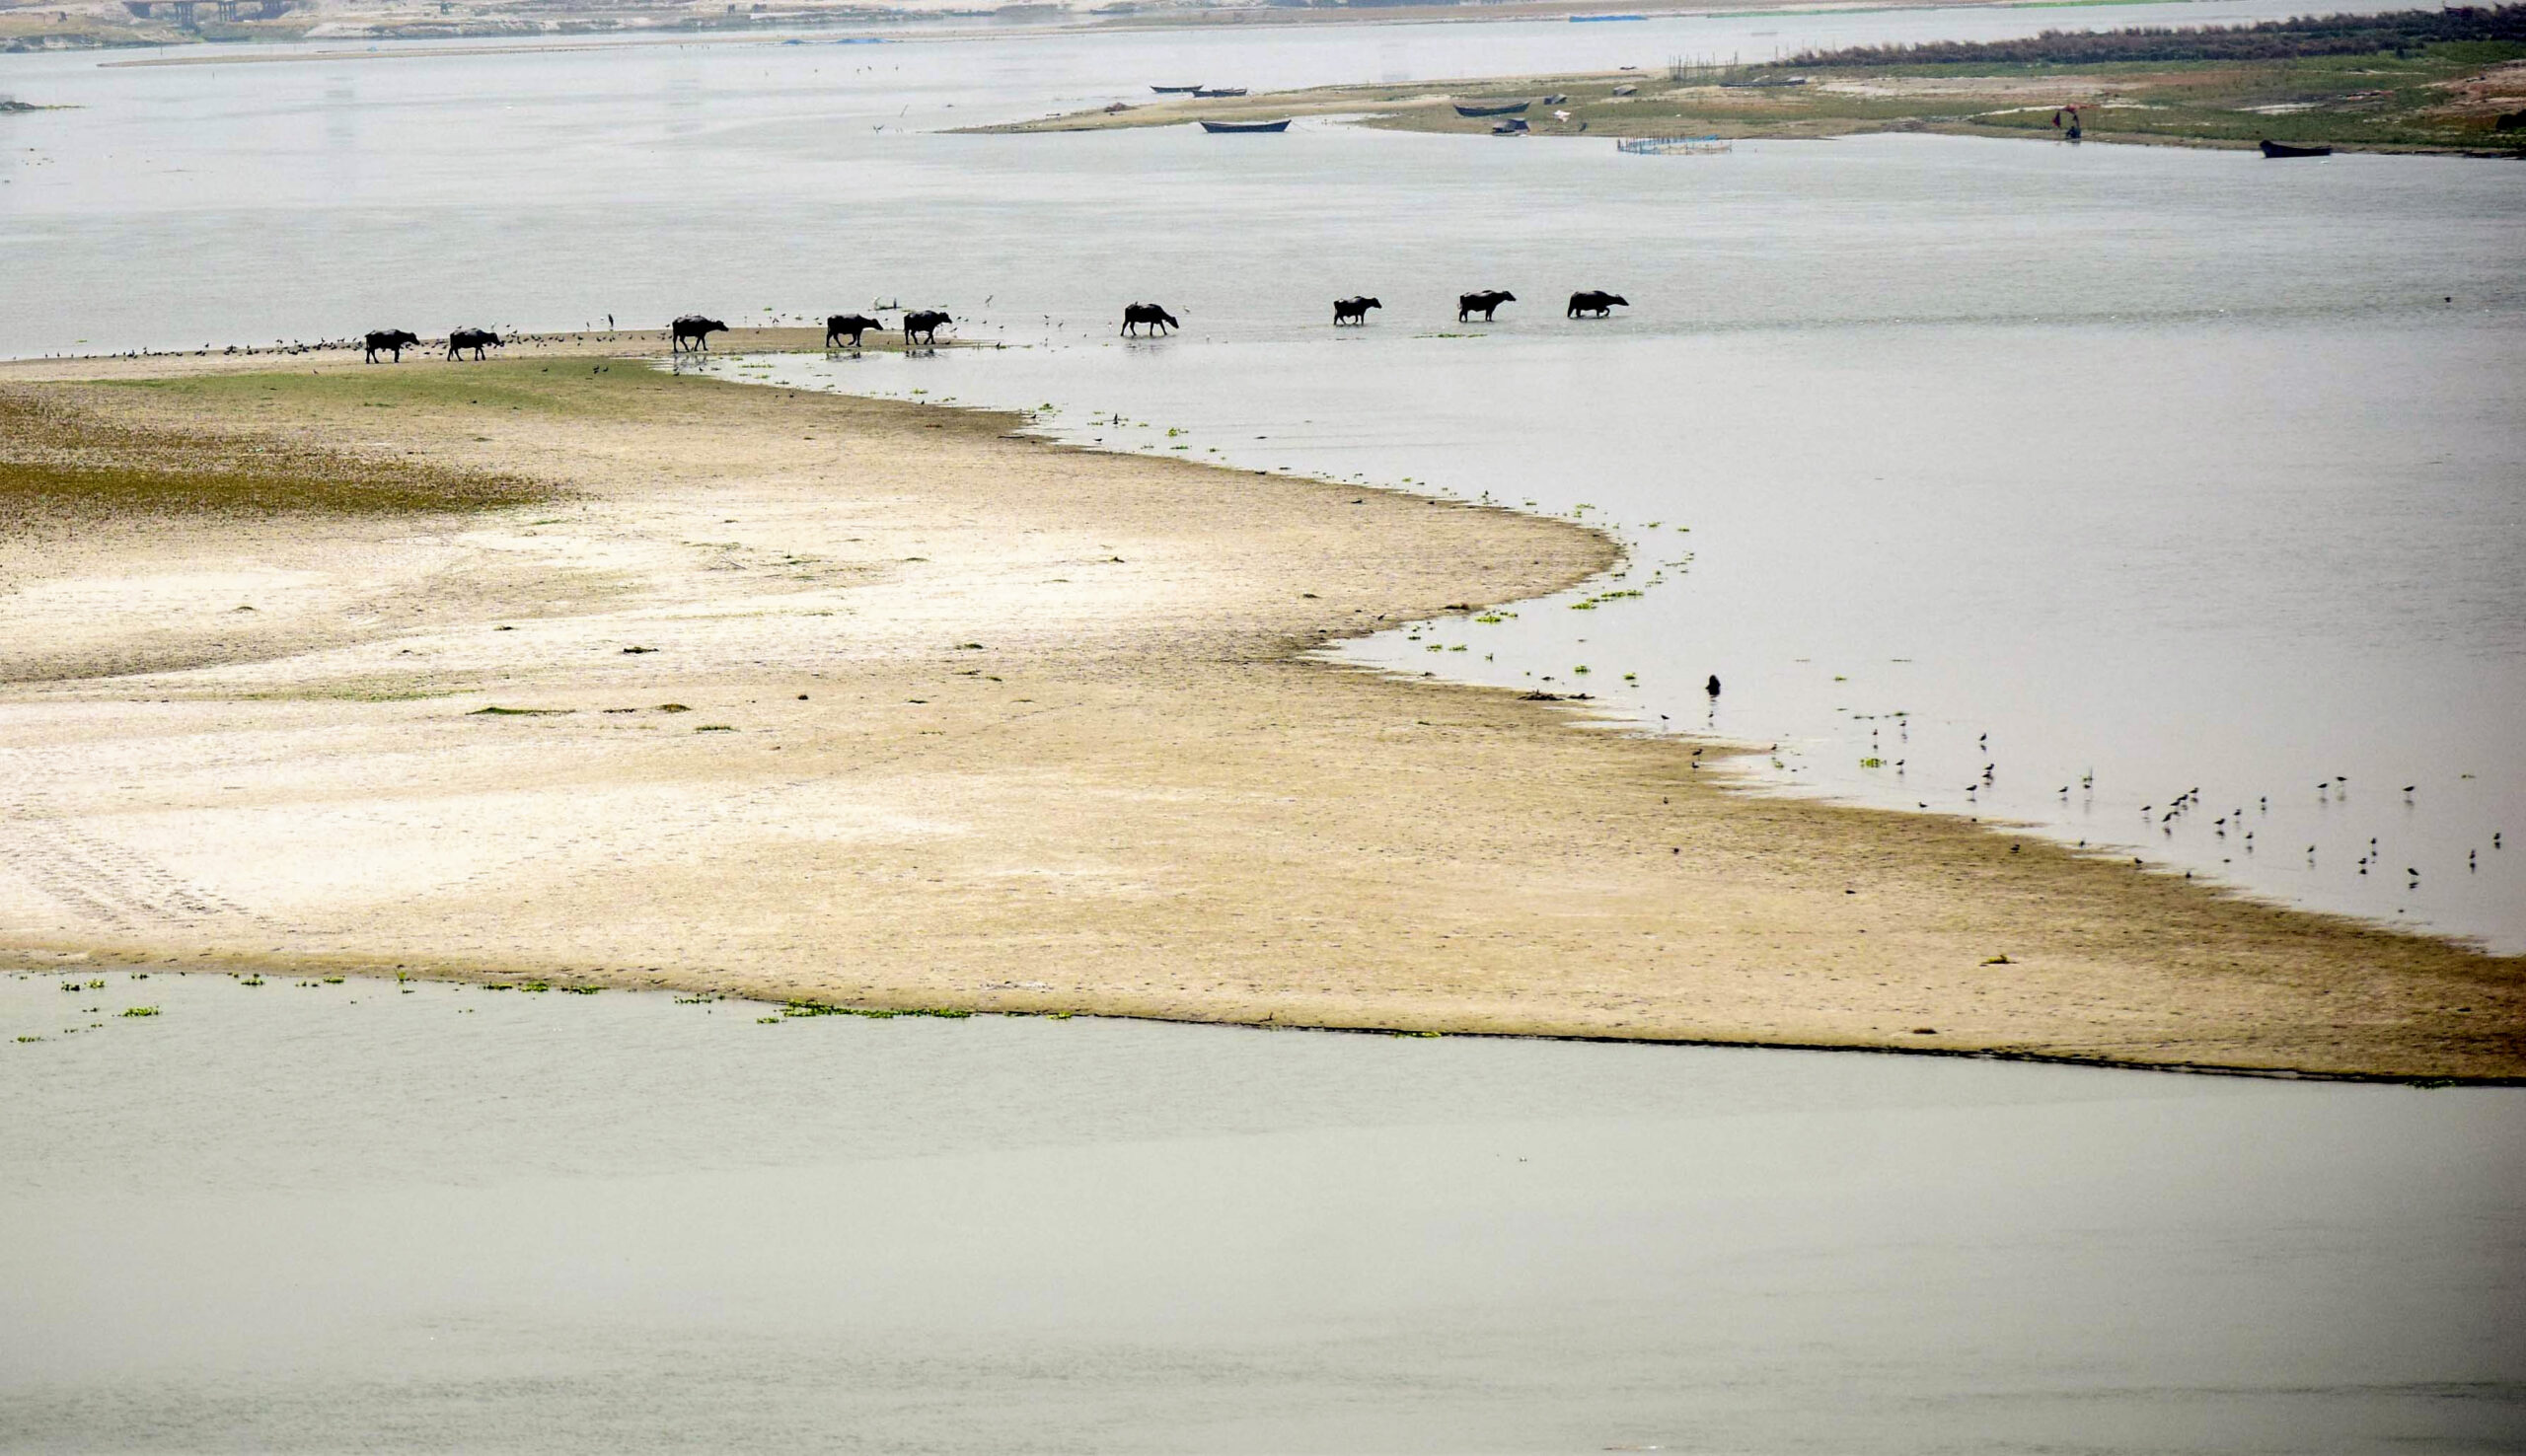 The water level of the Ganga river recedes due to severe rise in the temperature